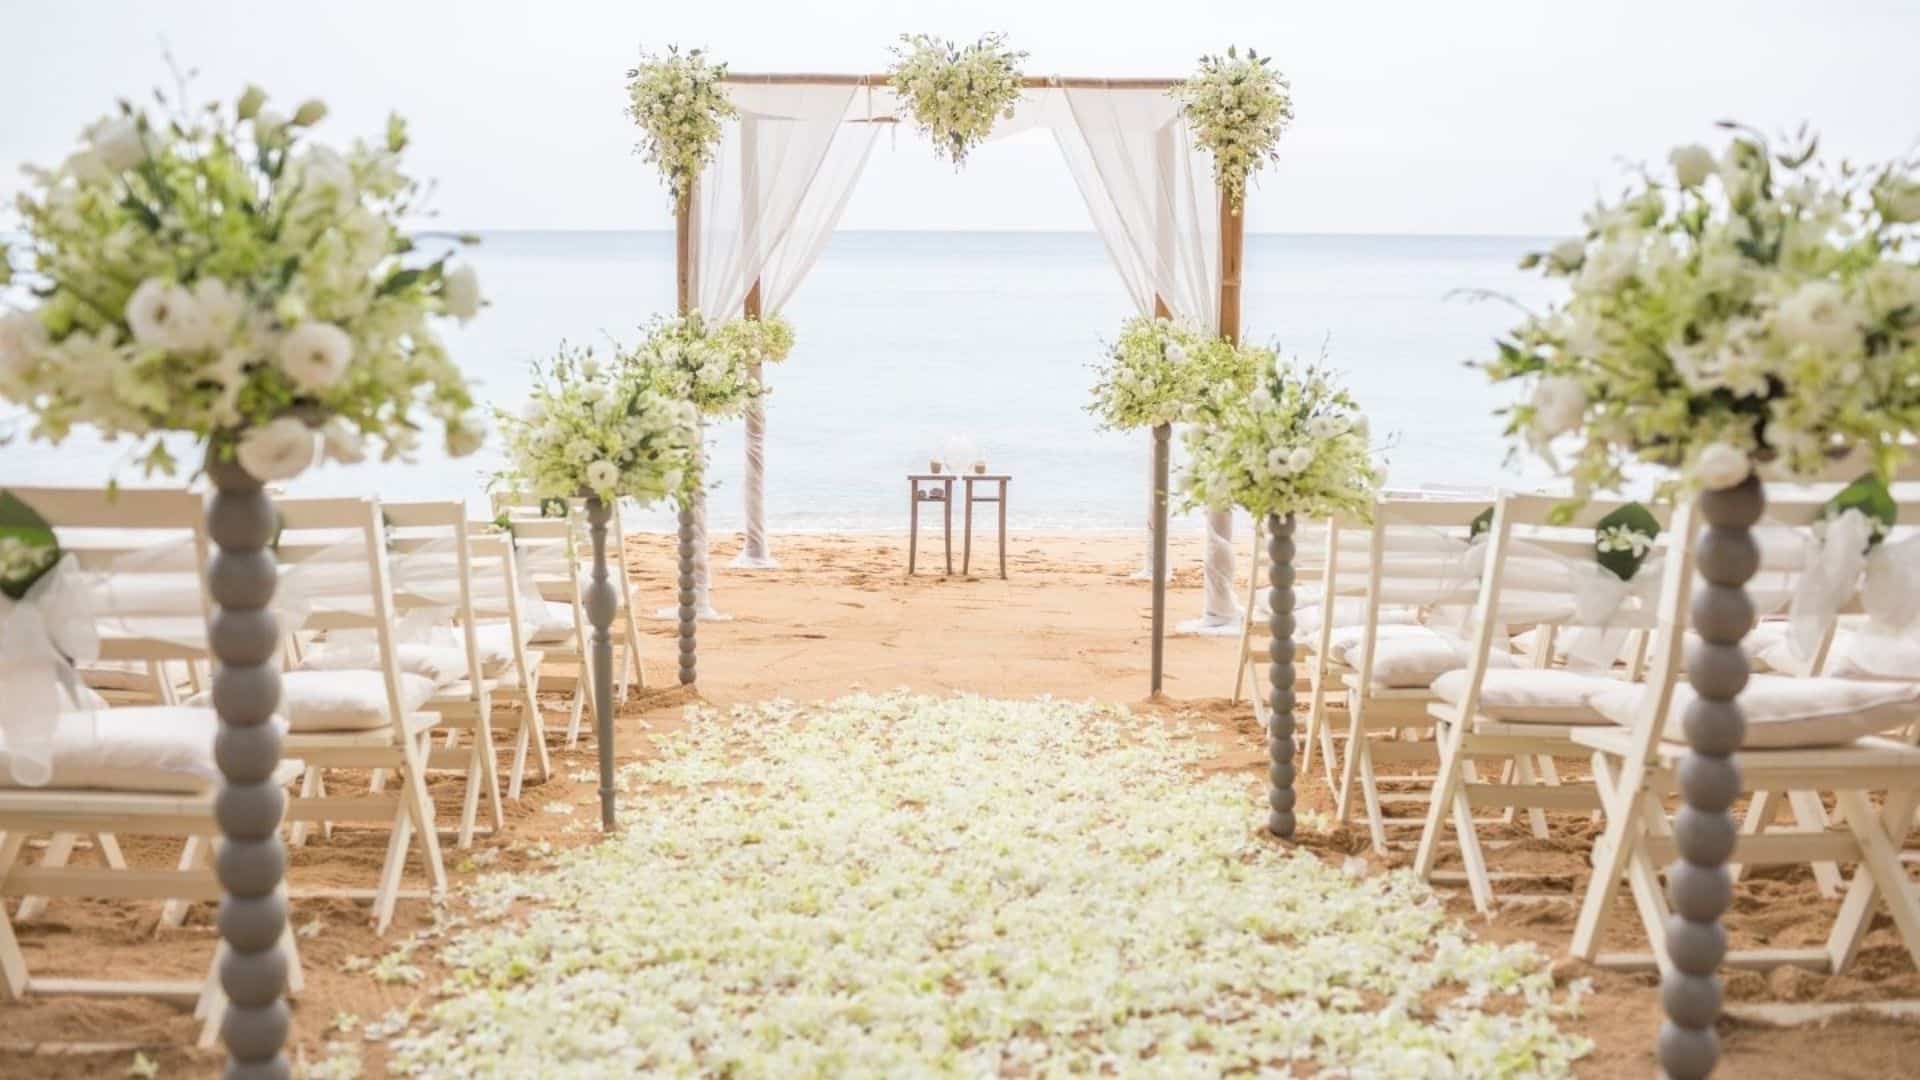 Scene of beach wedding with arbor and chairs